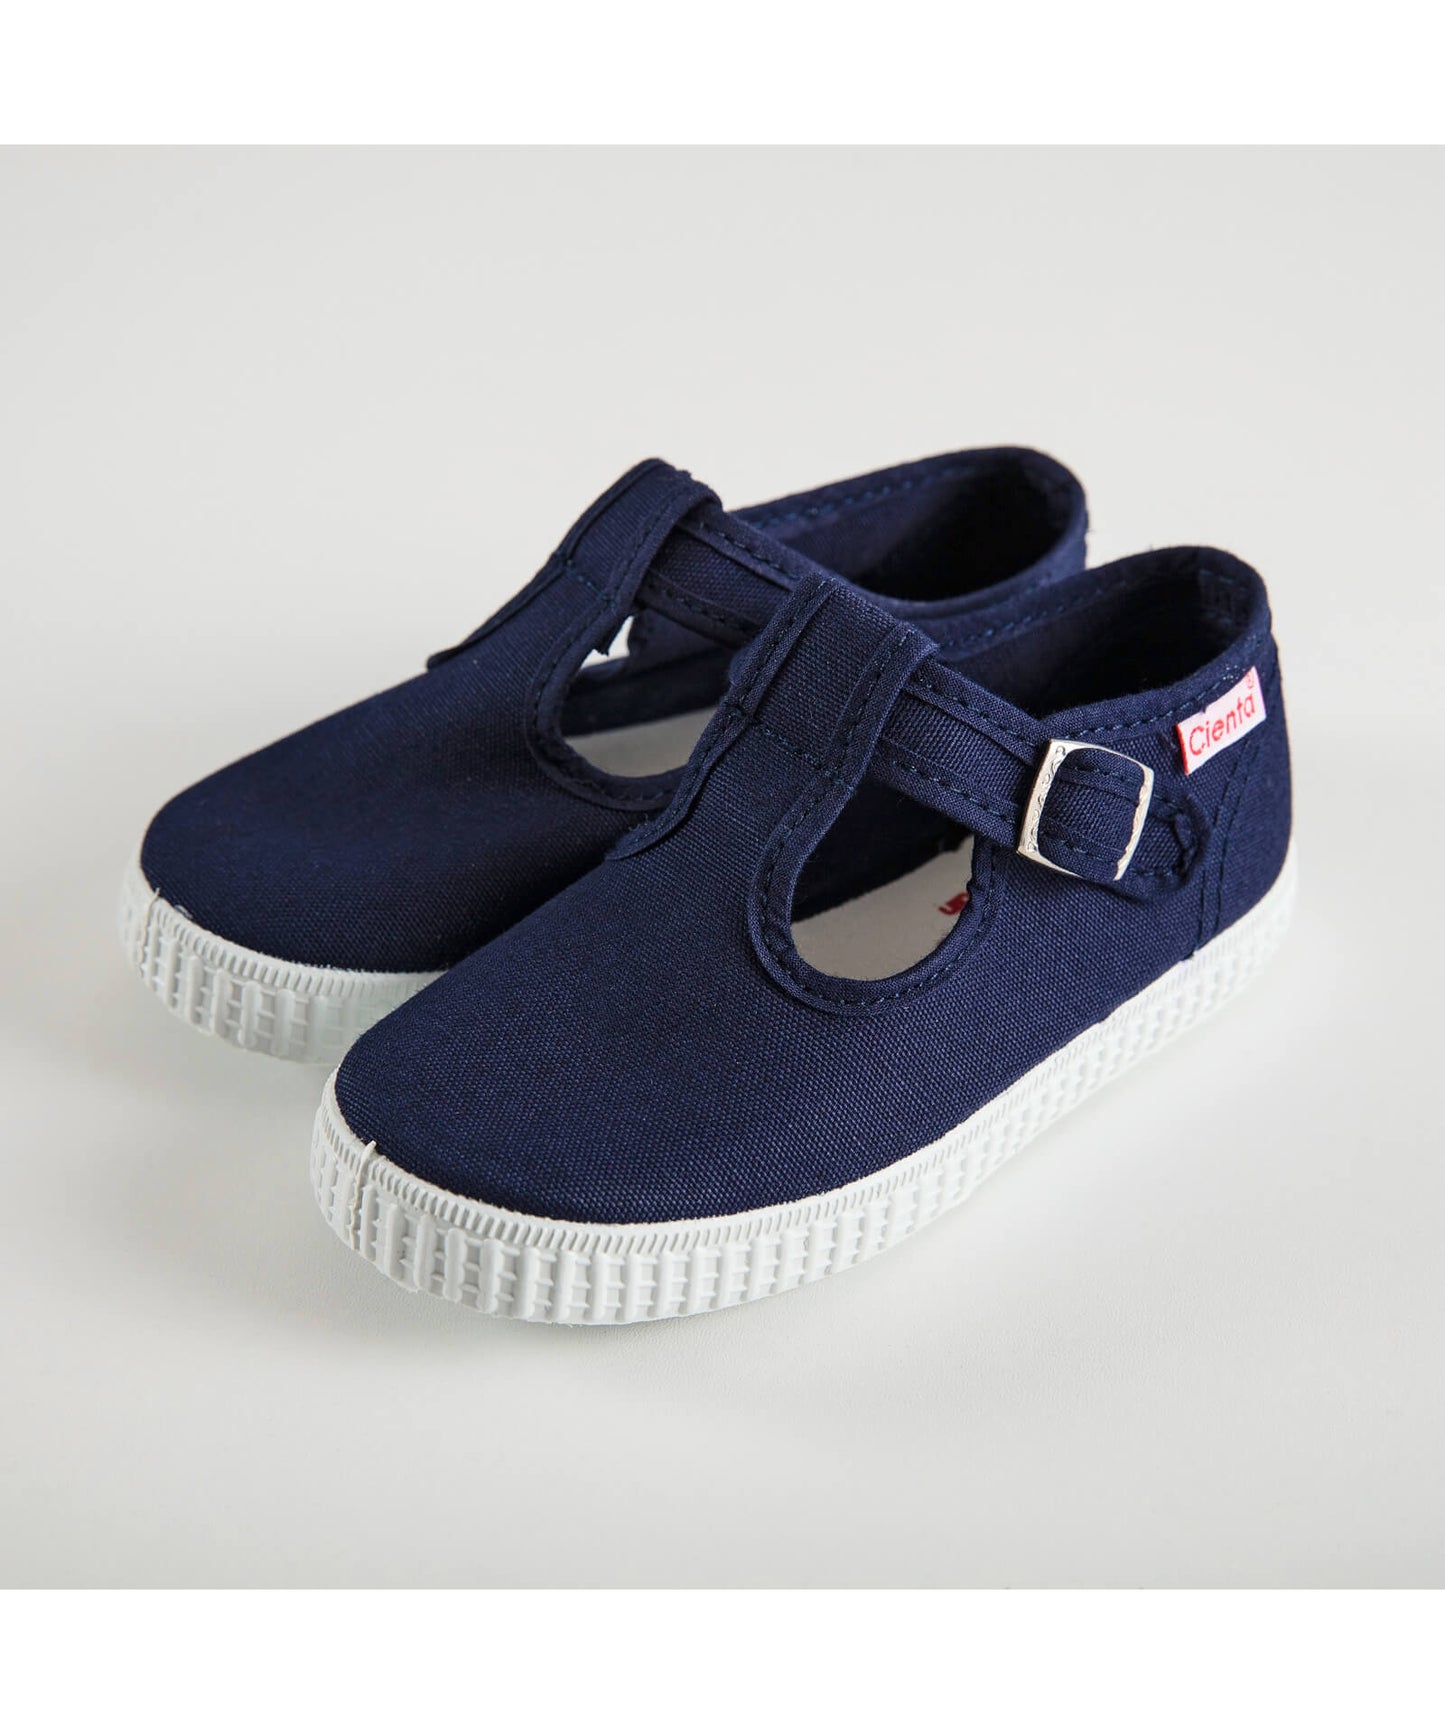 Navy T-Bar Kids Shoes by Cienta